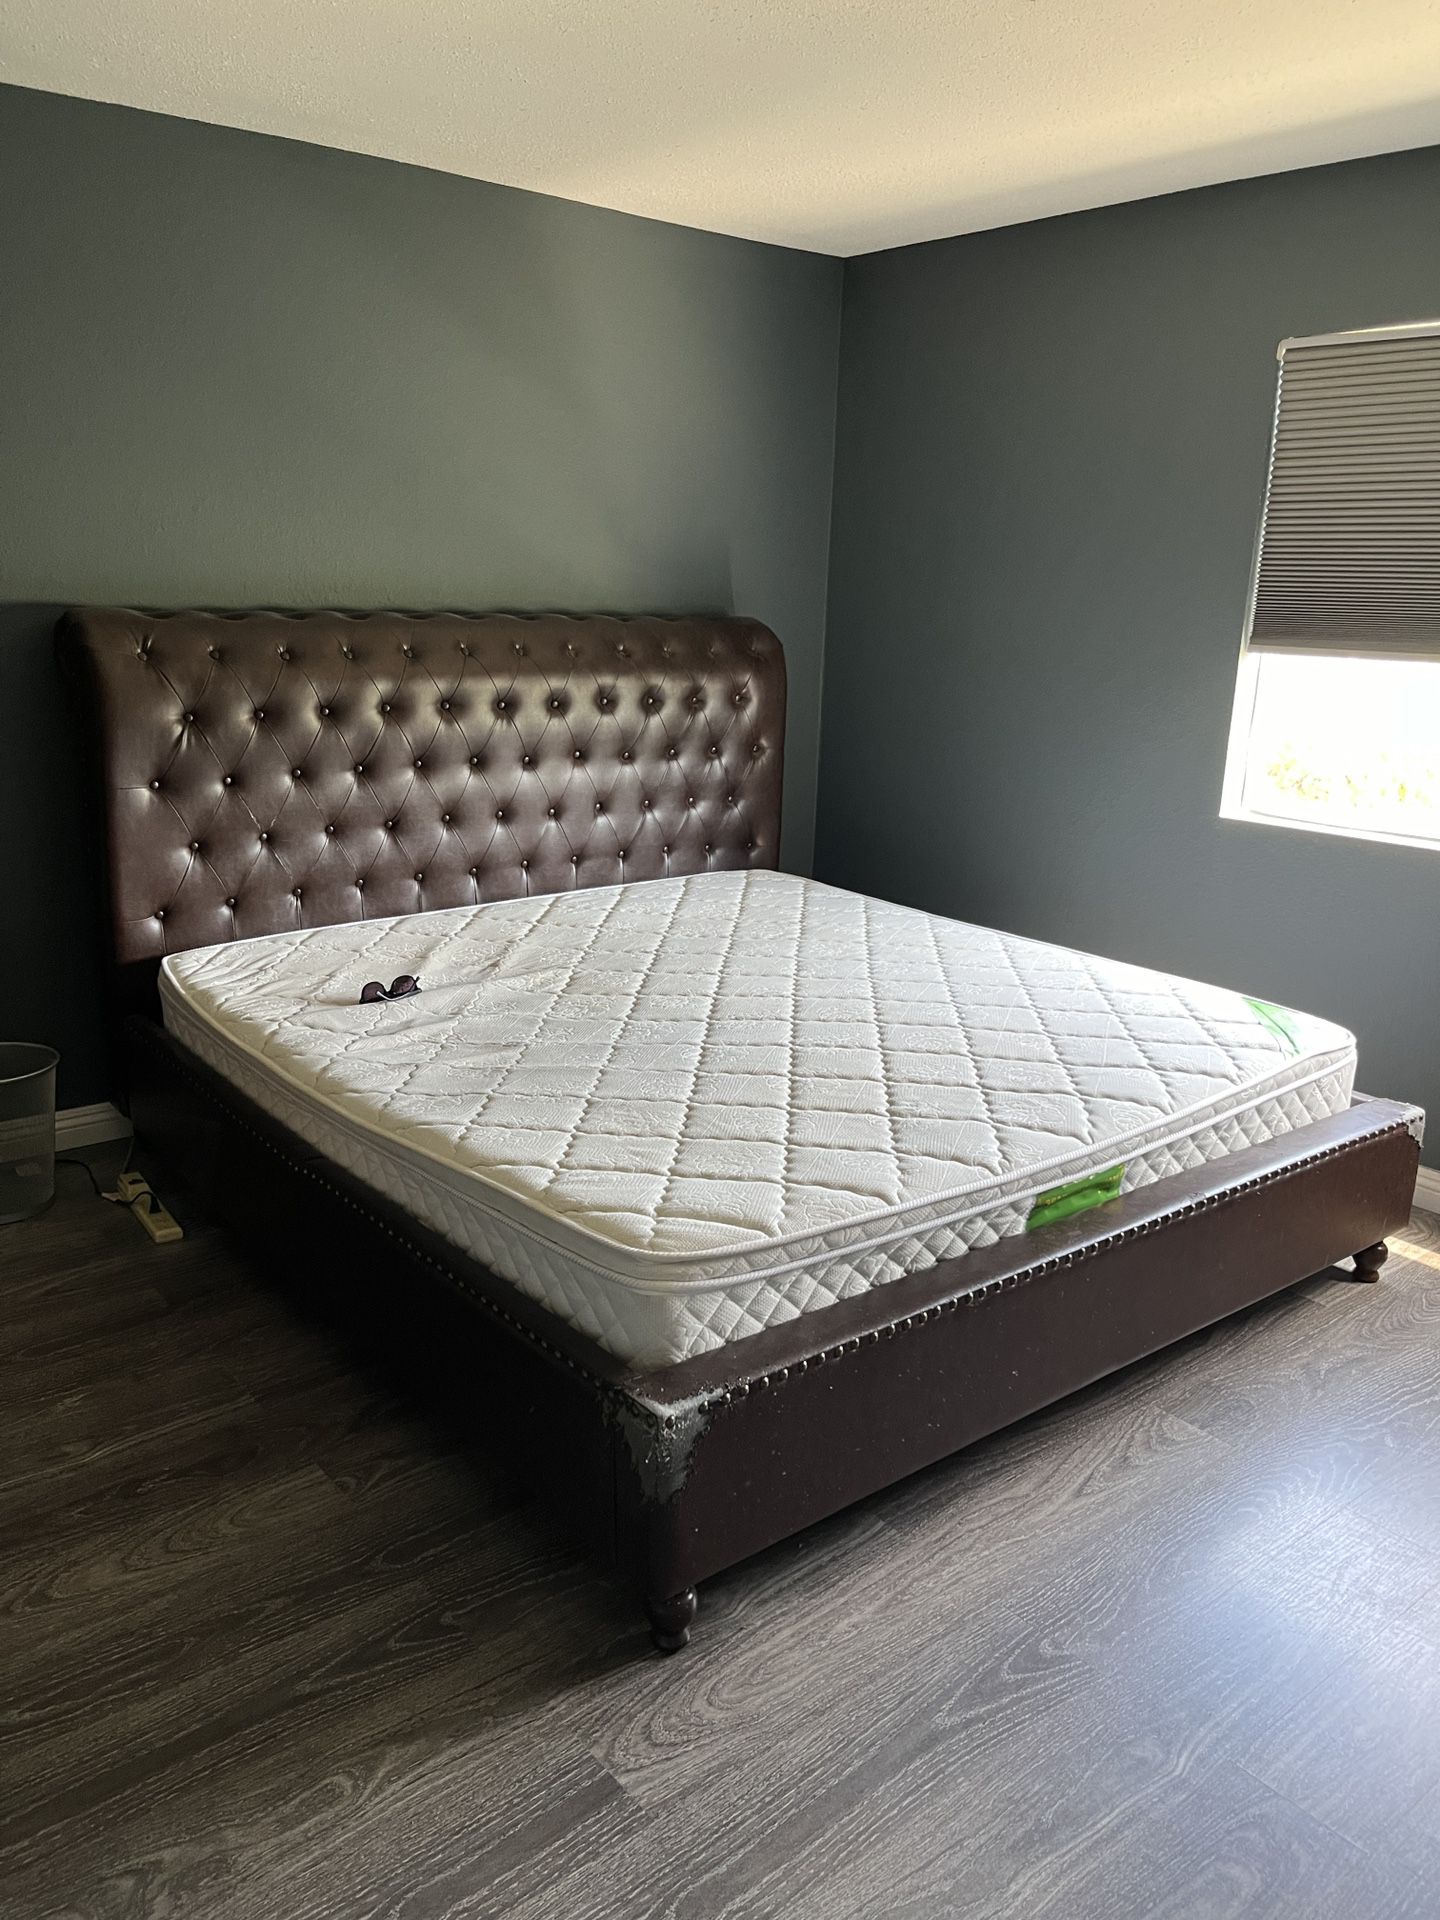 King Size bed and Frame